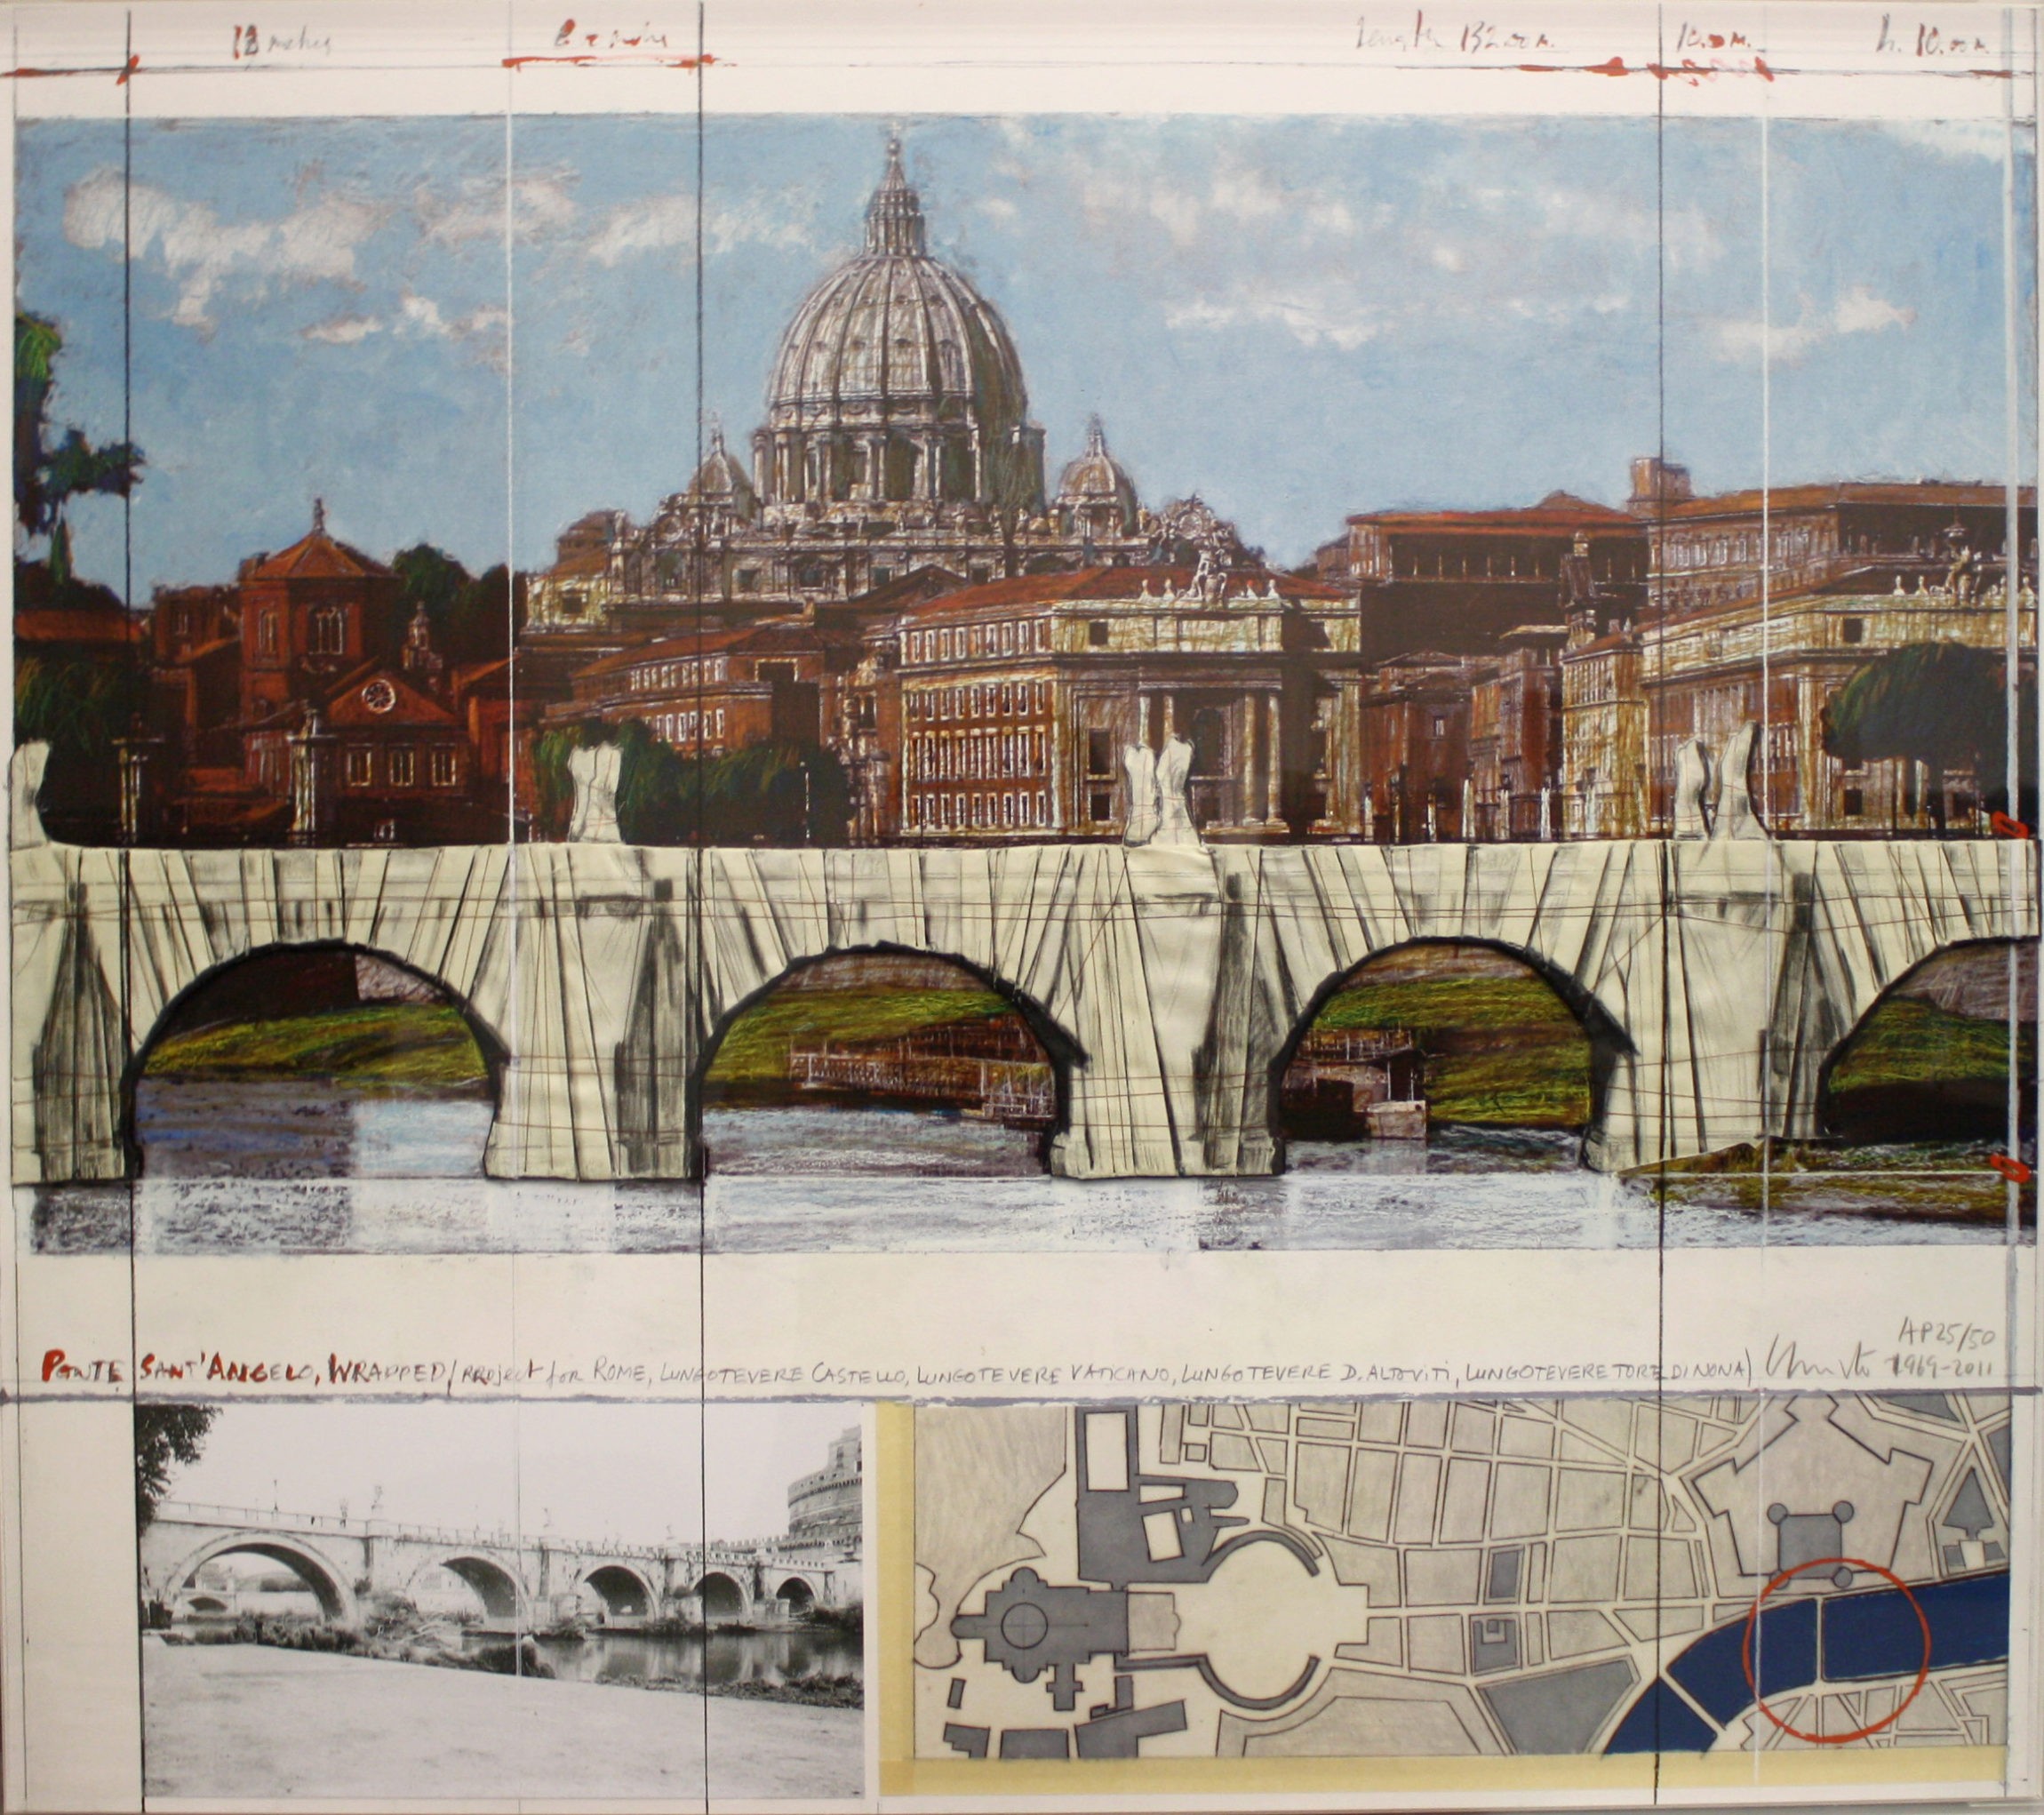 Christo | Ponte Sant Angelo | Wrapped Project for Rome | 2011 | Image of Artists' work.